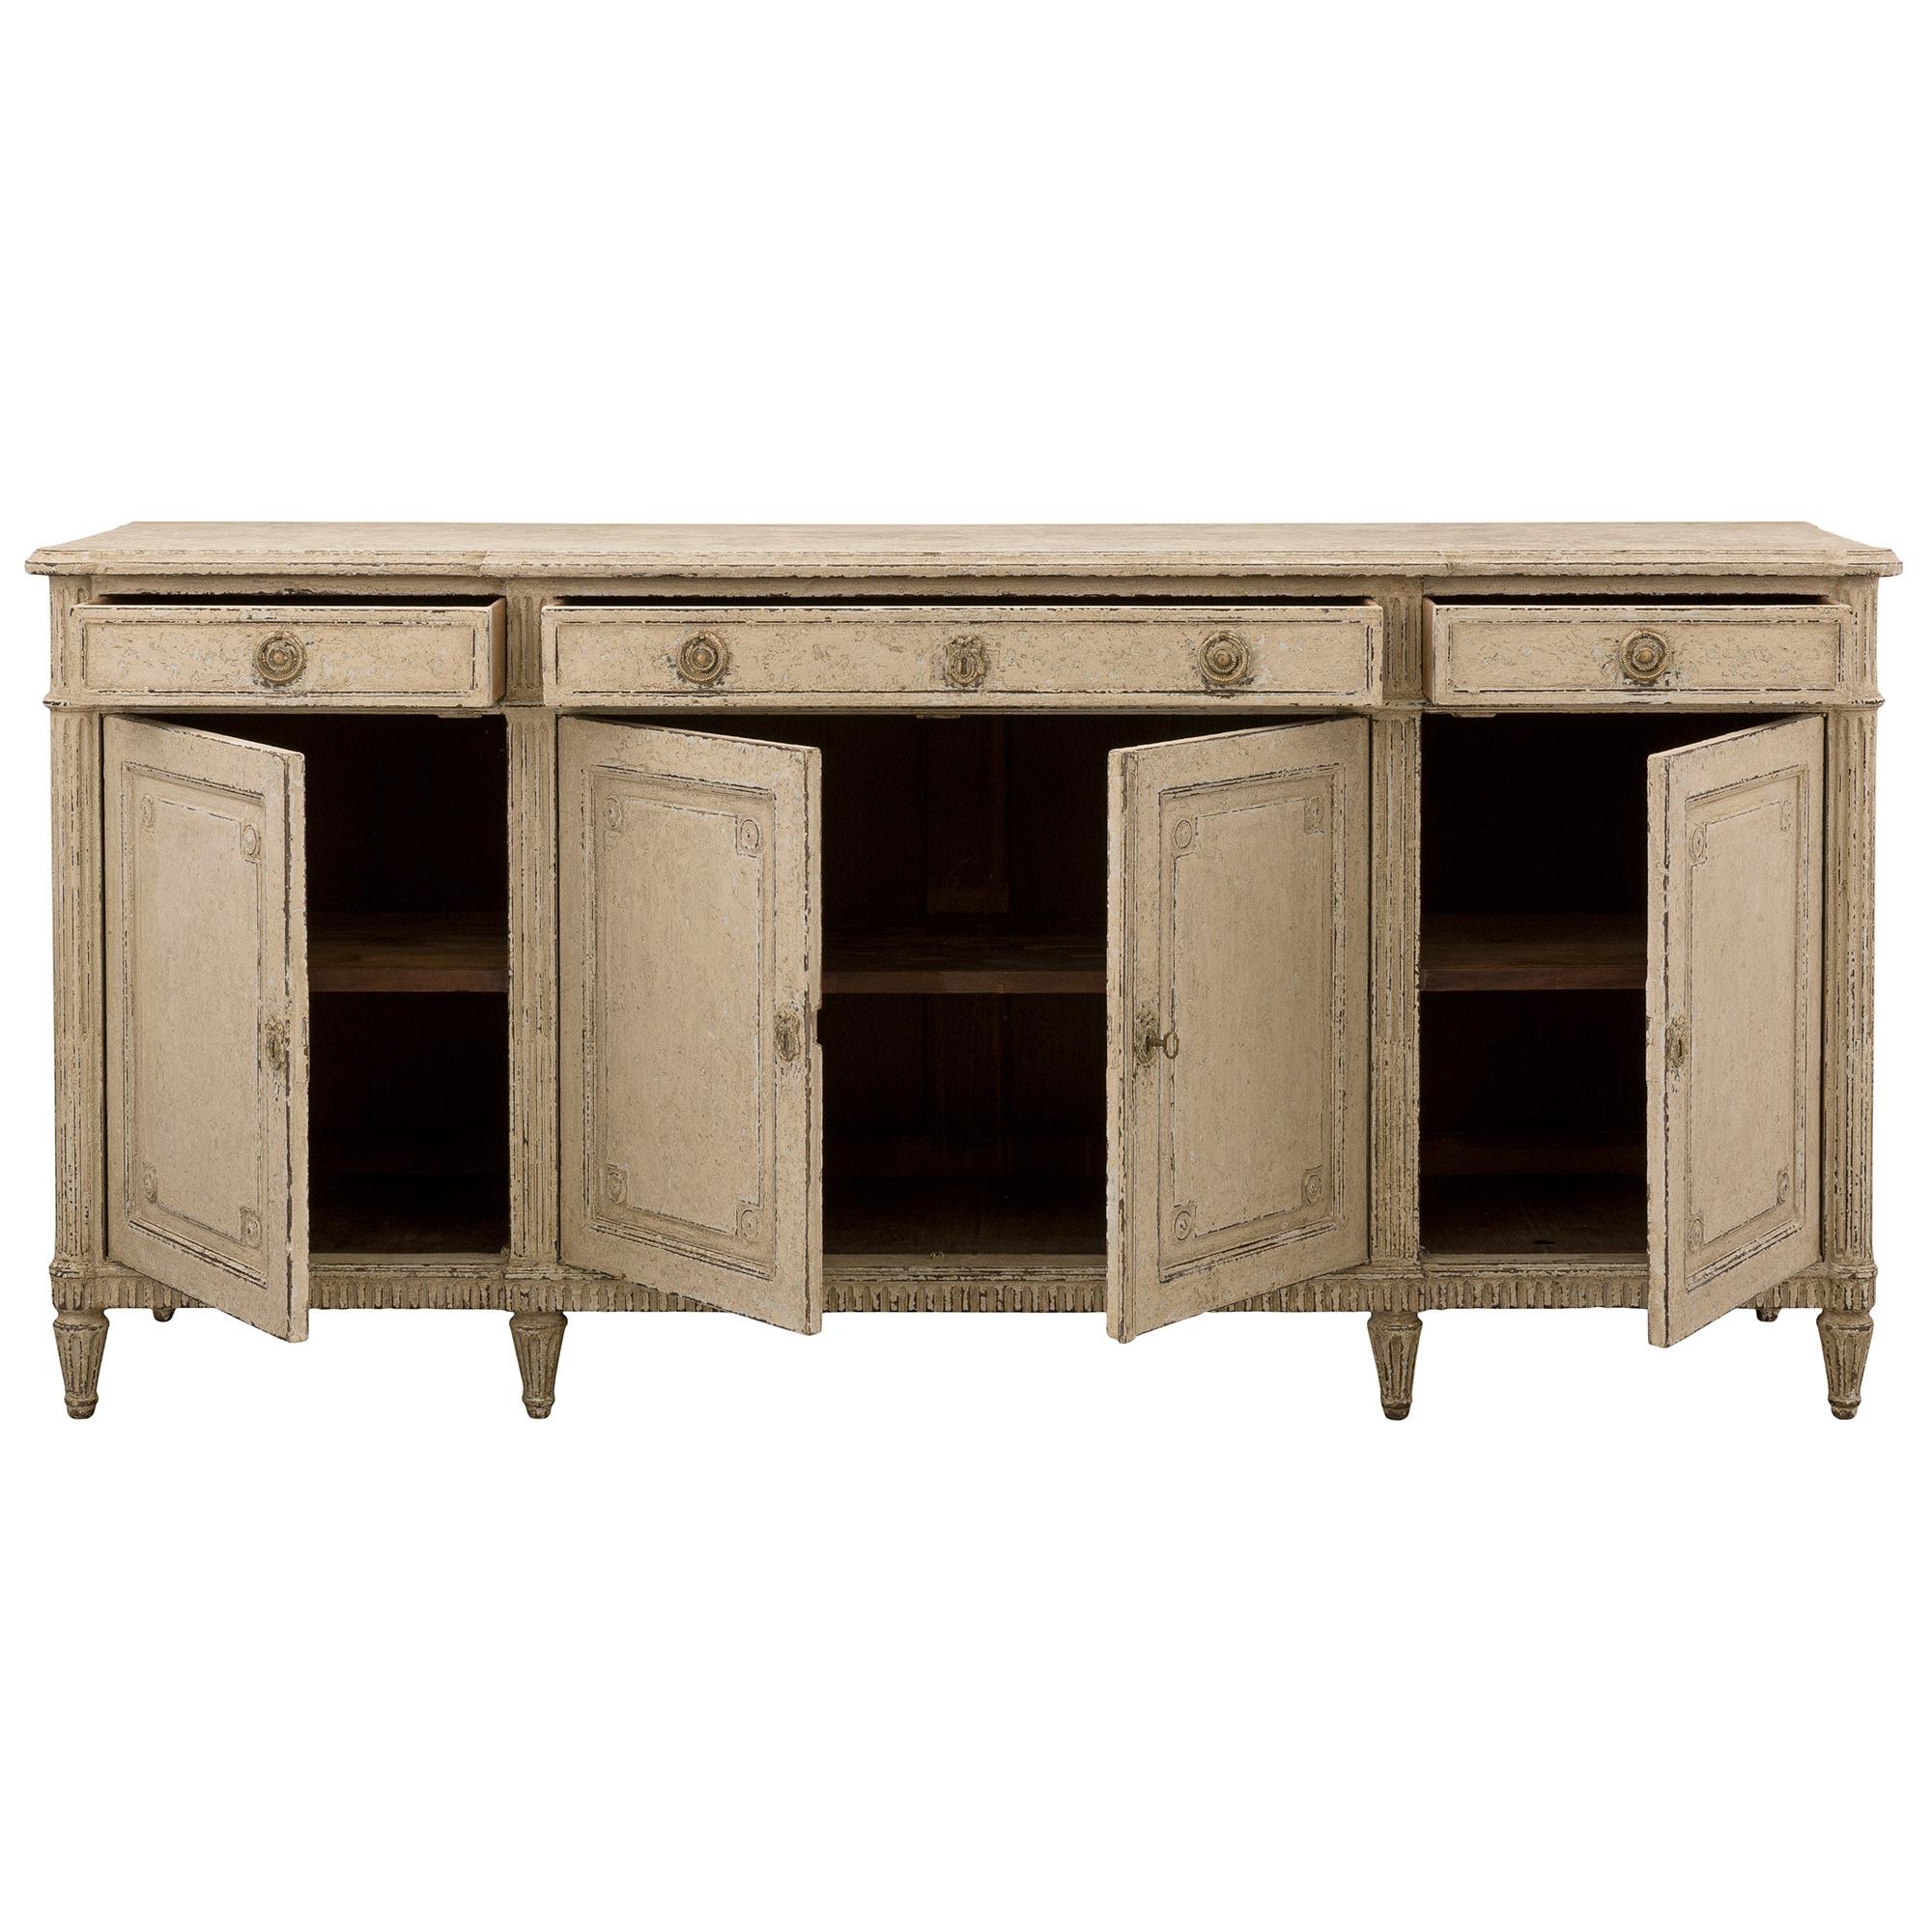 An elegant French 19th century Louis XVI st. patinated buffet. The four door three drawer buffet is raised by six circular tapered fluted legs below the straight fluted frieze. Each drawer displays a most decorative mottled recessed design with fine